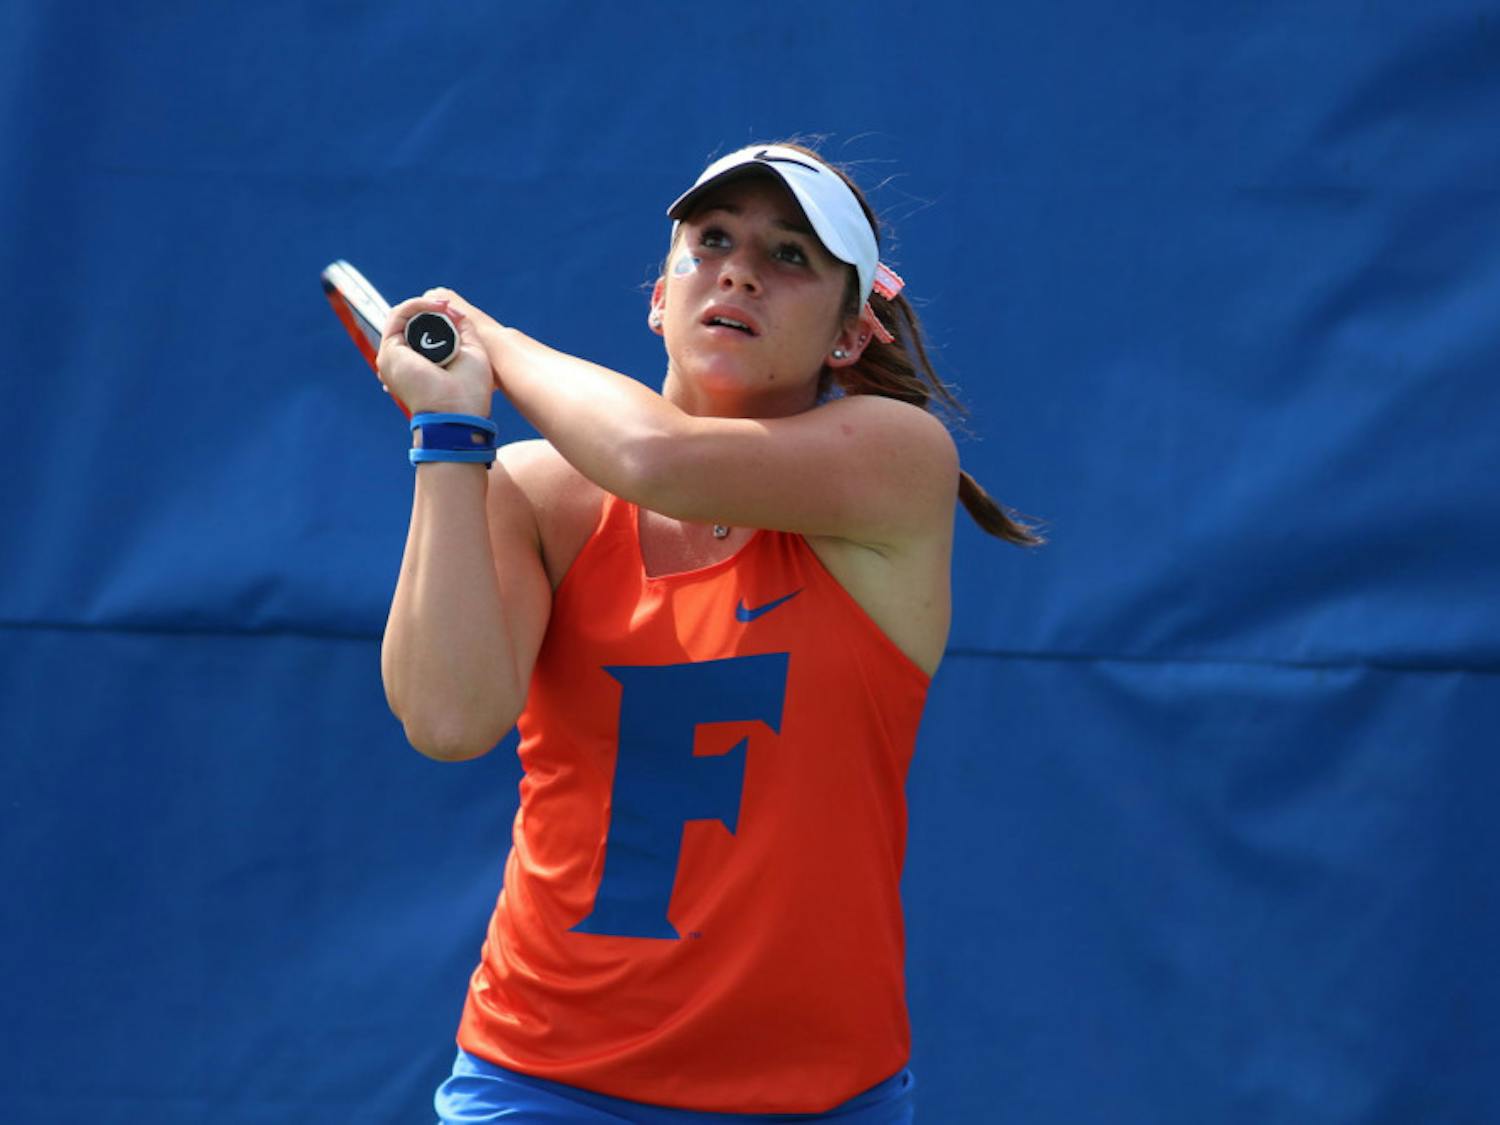 Sophomore Victoria Emma (pictured) and her doubles partner, junior&nbsp;Tsveta Dimitrova, lost narrowly (8-7) to the tournament's No. 1 seed of Southern California's&nbsp;Angela Kulikov and Rianna Valdes, eliminating them from the ITA All-American Championships. Emma later took victory in the tournament's singles back draw.&nbsp;